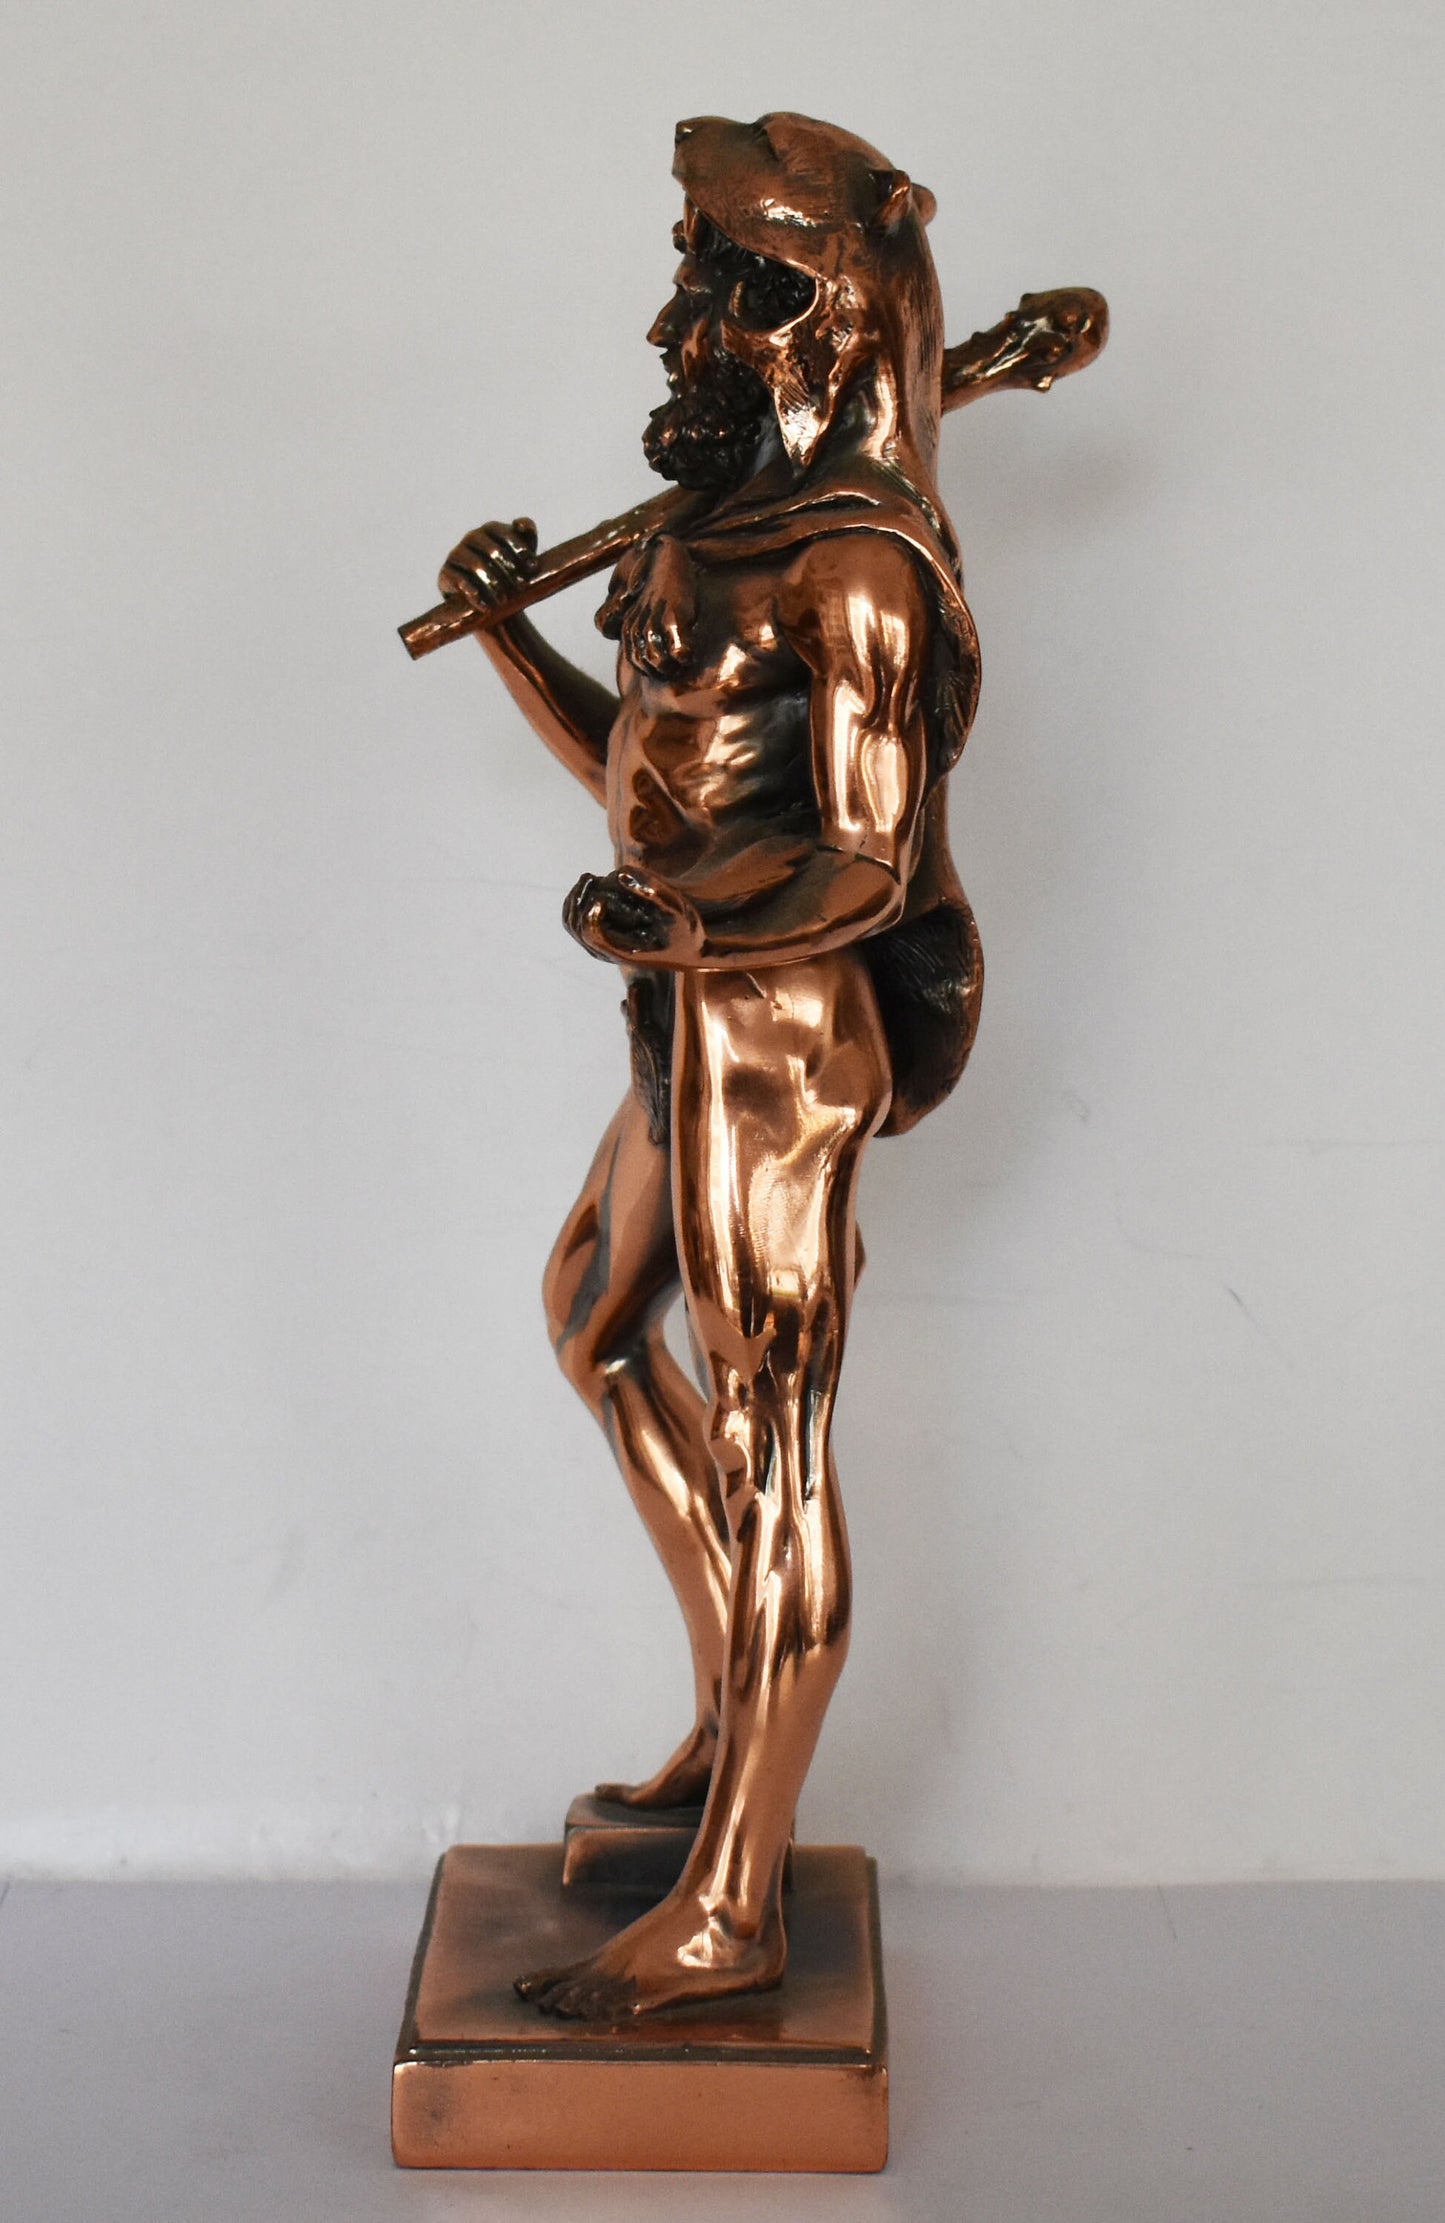 Hercules - Heracles - Son of Zeus and Alcmene - Greek Divine Hero - The 12 Labours - Strong, Brave and Masculine - Copper Plated Alabaster